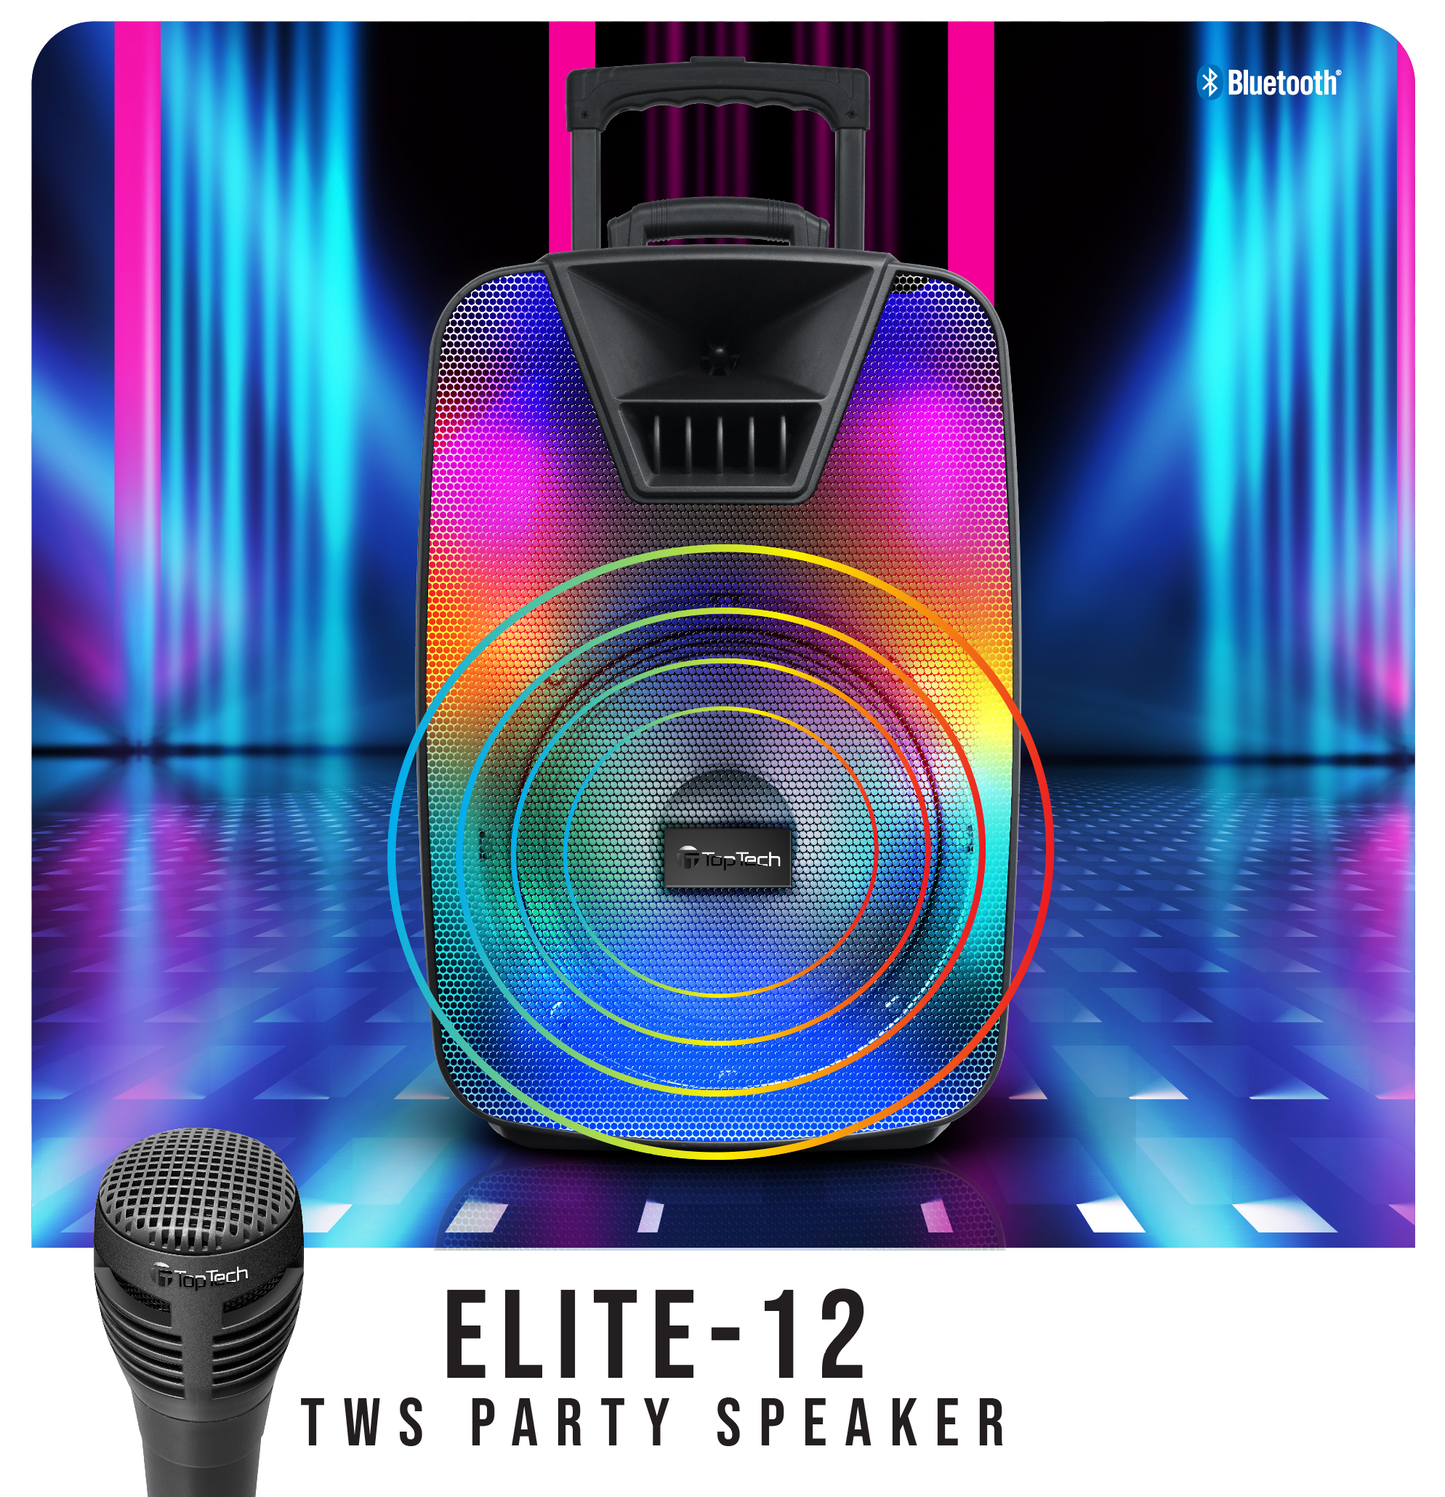 TOPTECH ELITE-12, 12 Inch Portable Bluetooth Speaker, Wireless Powerful TWS Sound and Flame Effects Lights, Unblemished Sound Purity, Up to 10 Meters (33ft) Bluetooth Distance, Up to 10 Meters (33ft) Bluetooth Distance for Party Outdoor Camping